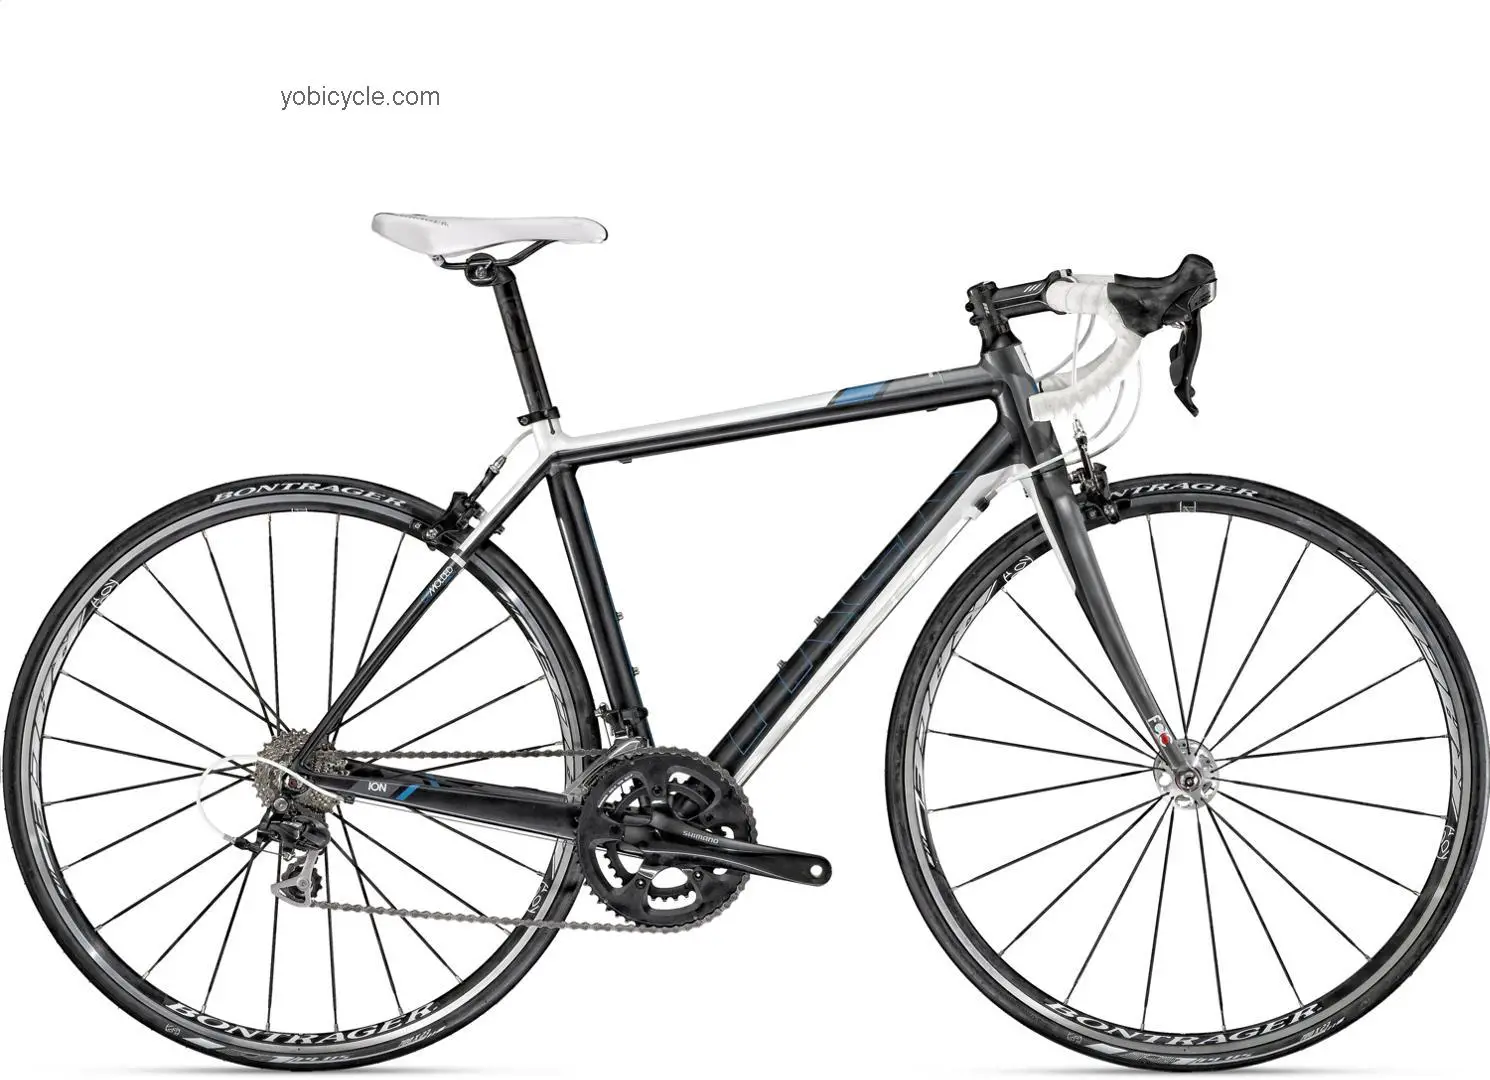 Trek Gary Fisher Ion Pro WSD 2011 comparison online with competitors